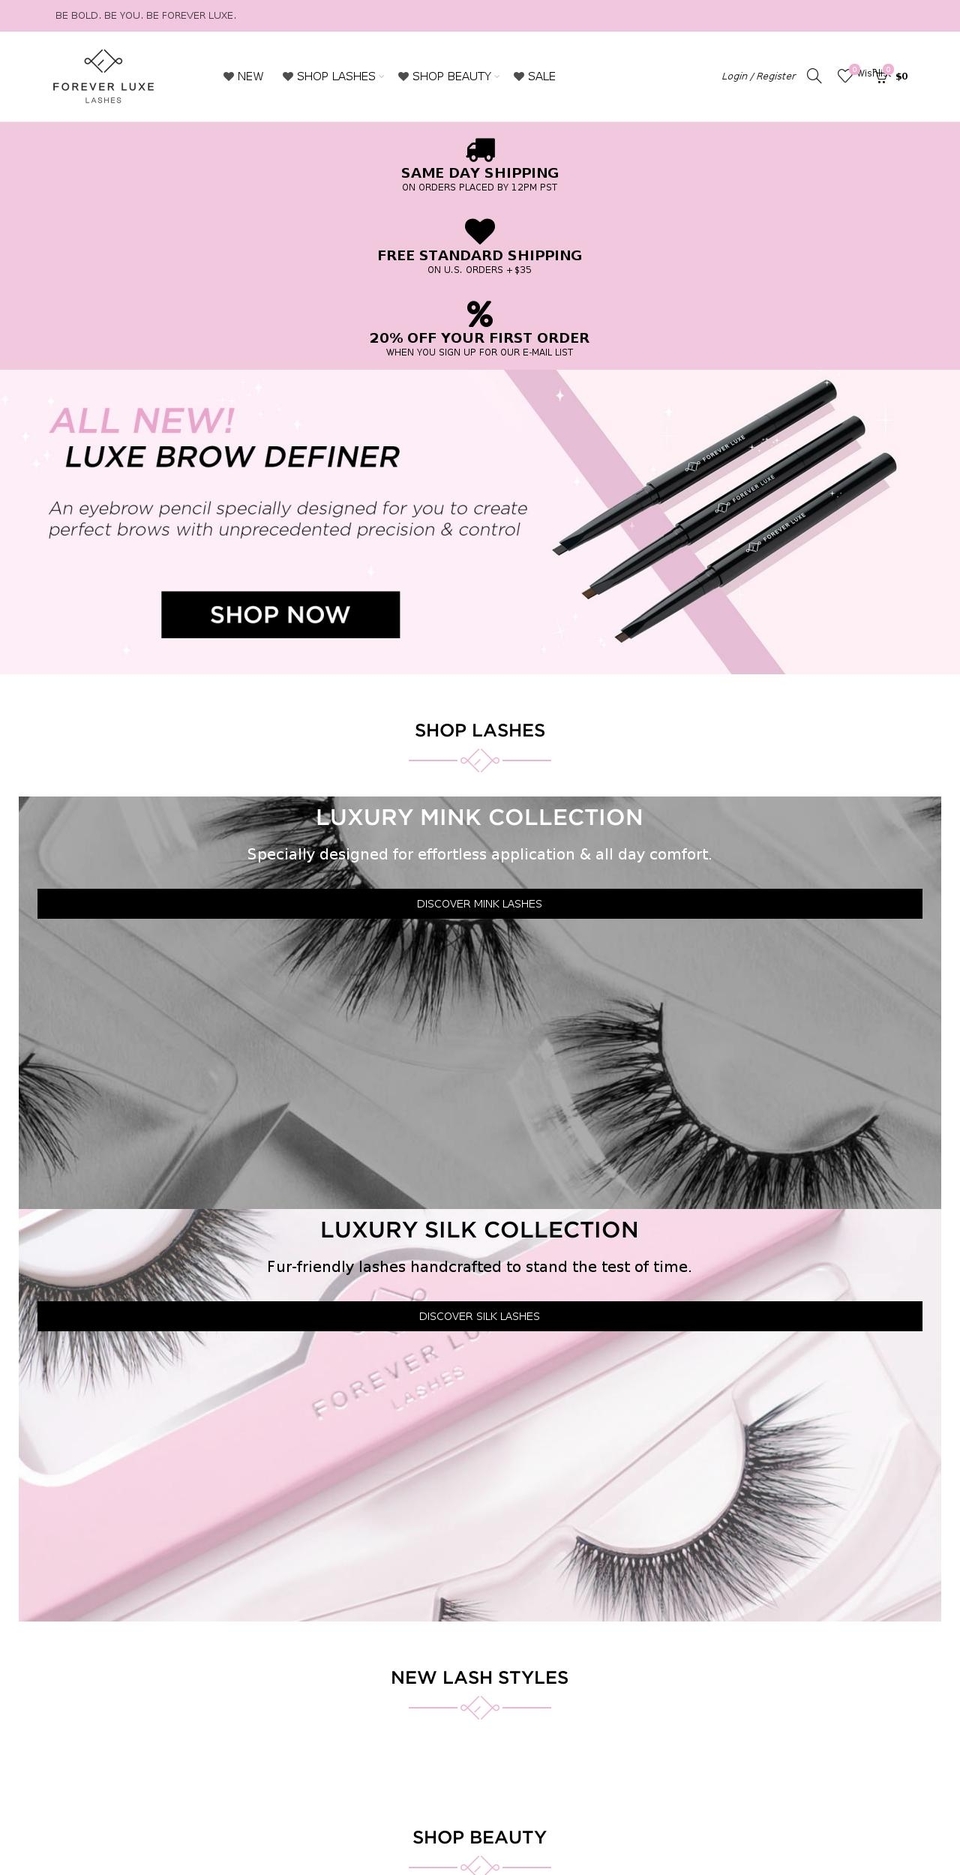 NEW Shopify theme site example foreverluxebeauty.com